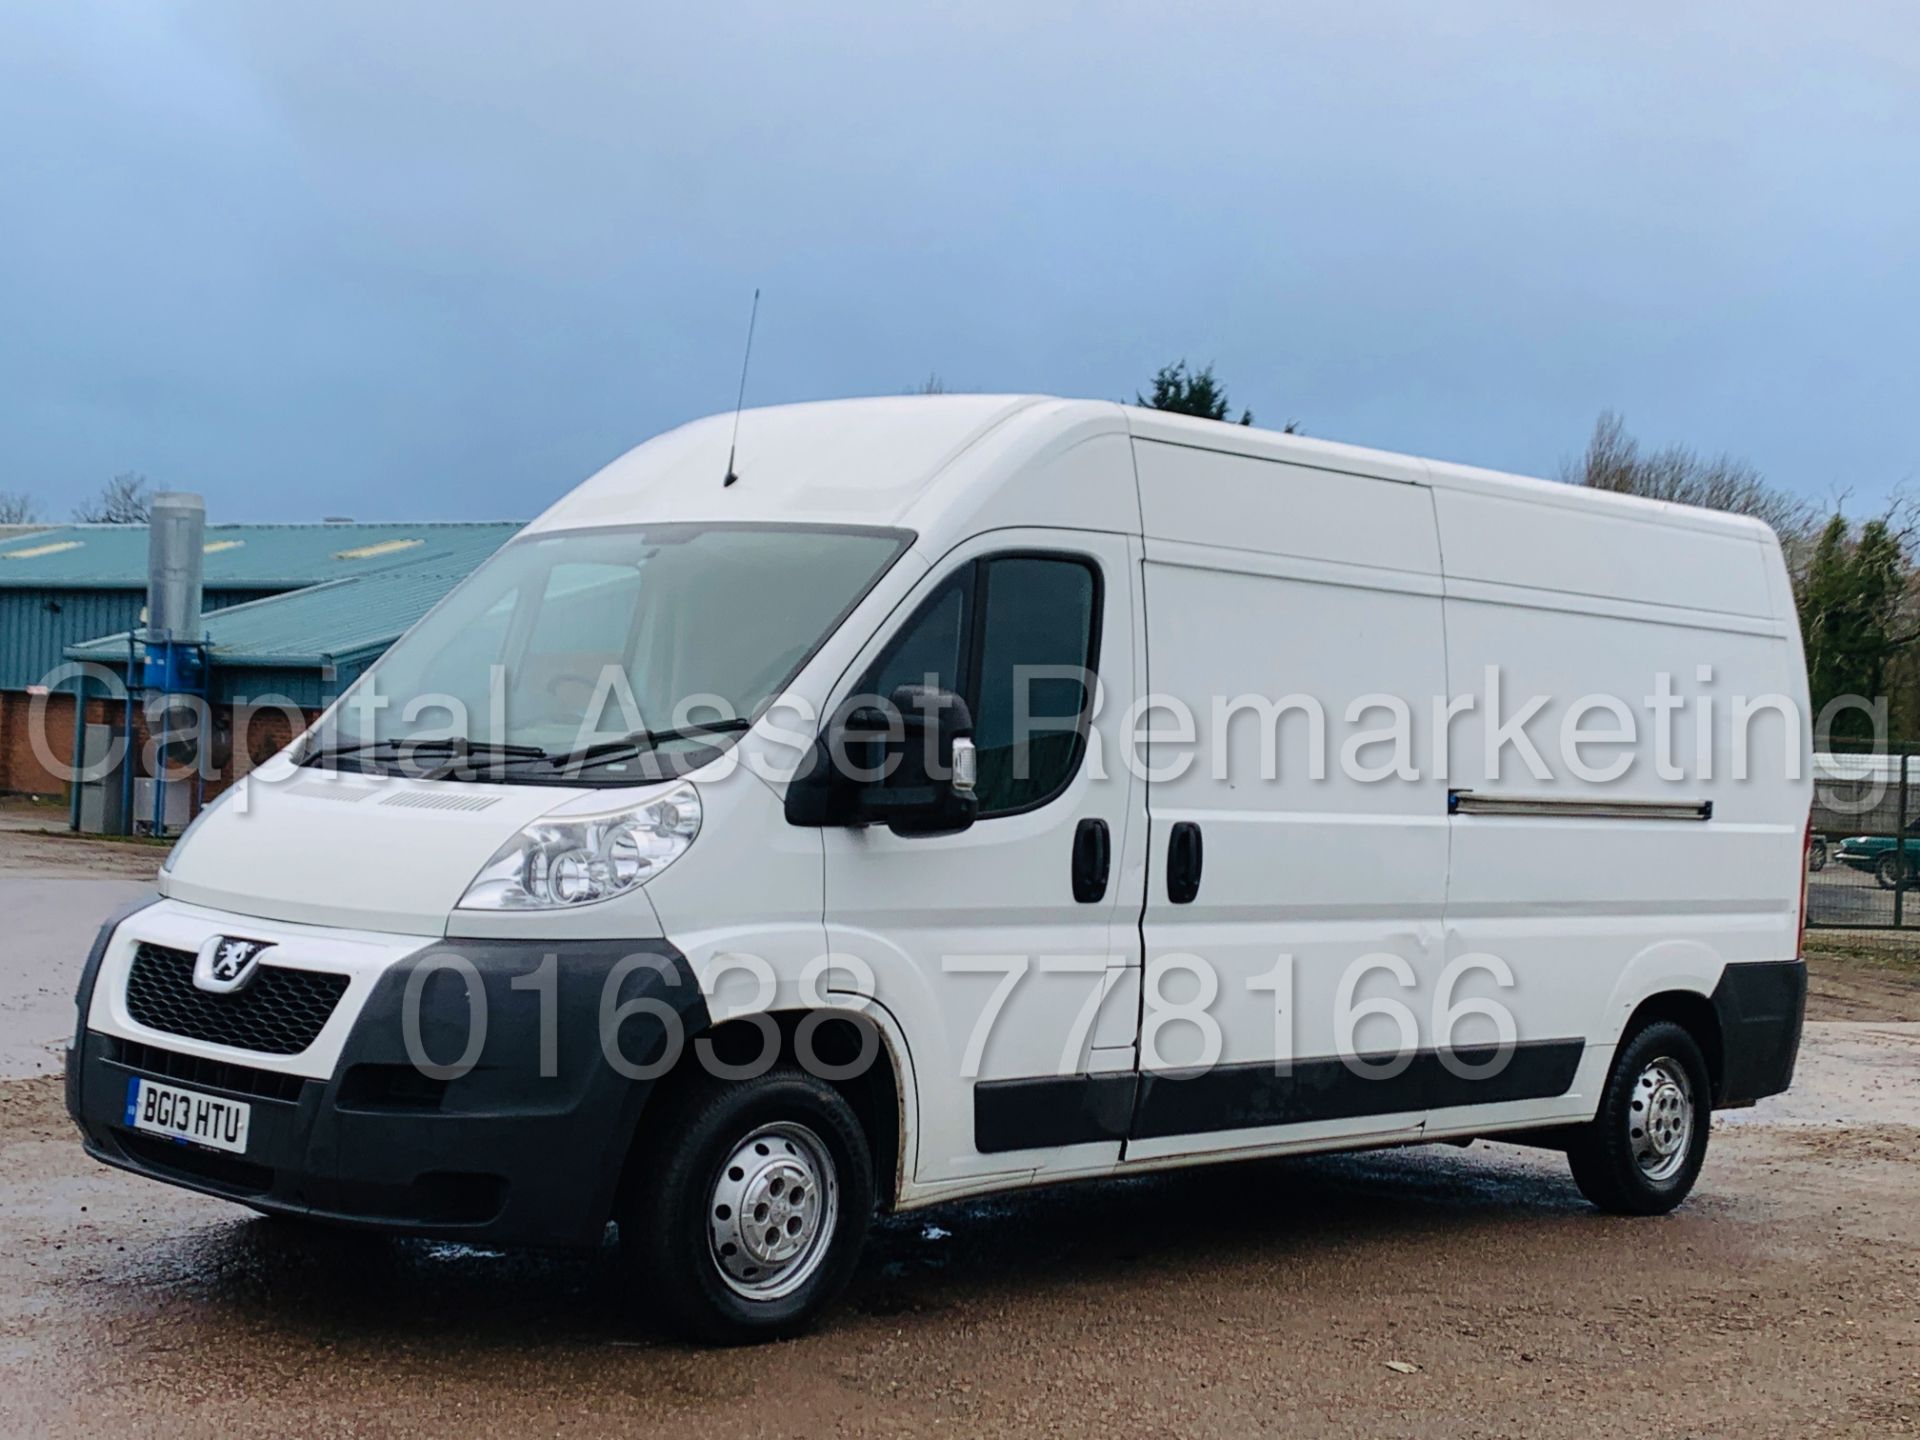 PEUGEOT BOXER 335 *LWB HI-ROOF* (2013) '2.2 HDI - 130 BHP - 6 SPEED' *ONLY 77,000 MILES* (NO VAT) - Image 7 of 31